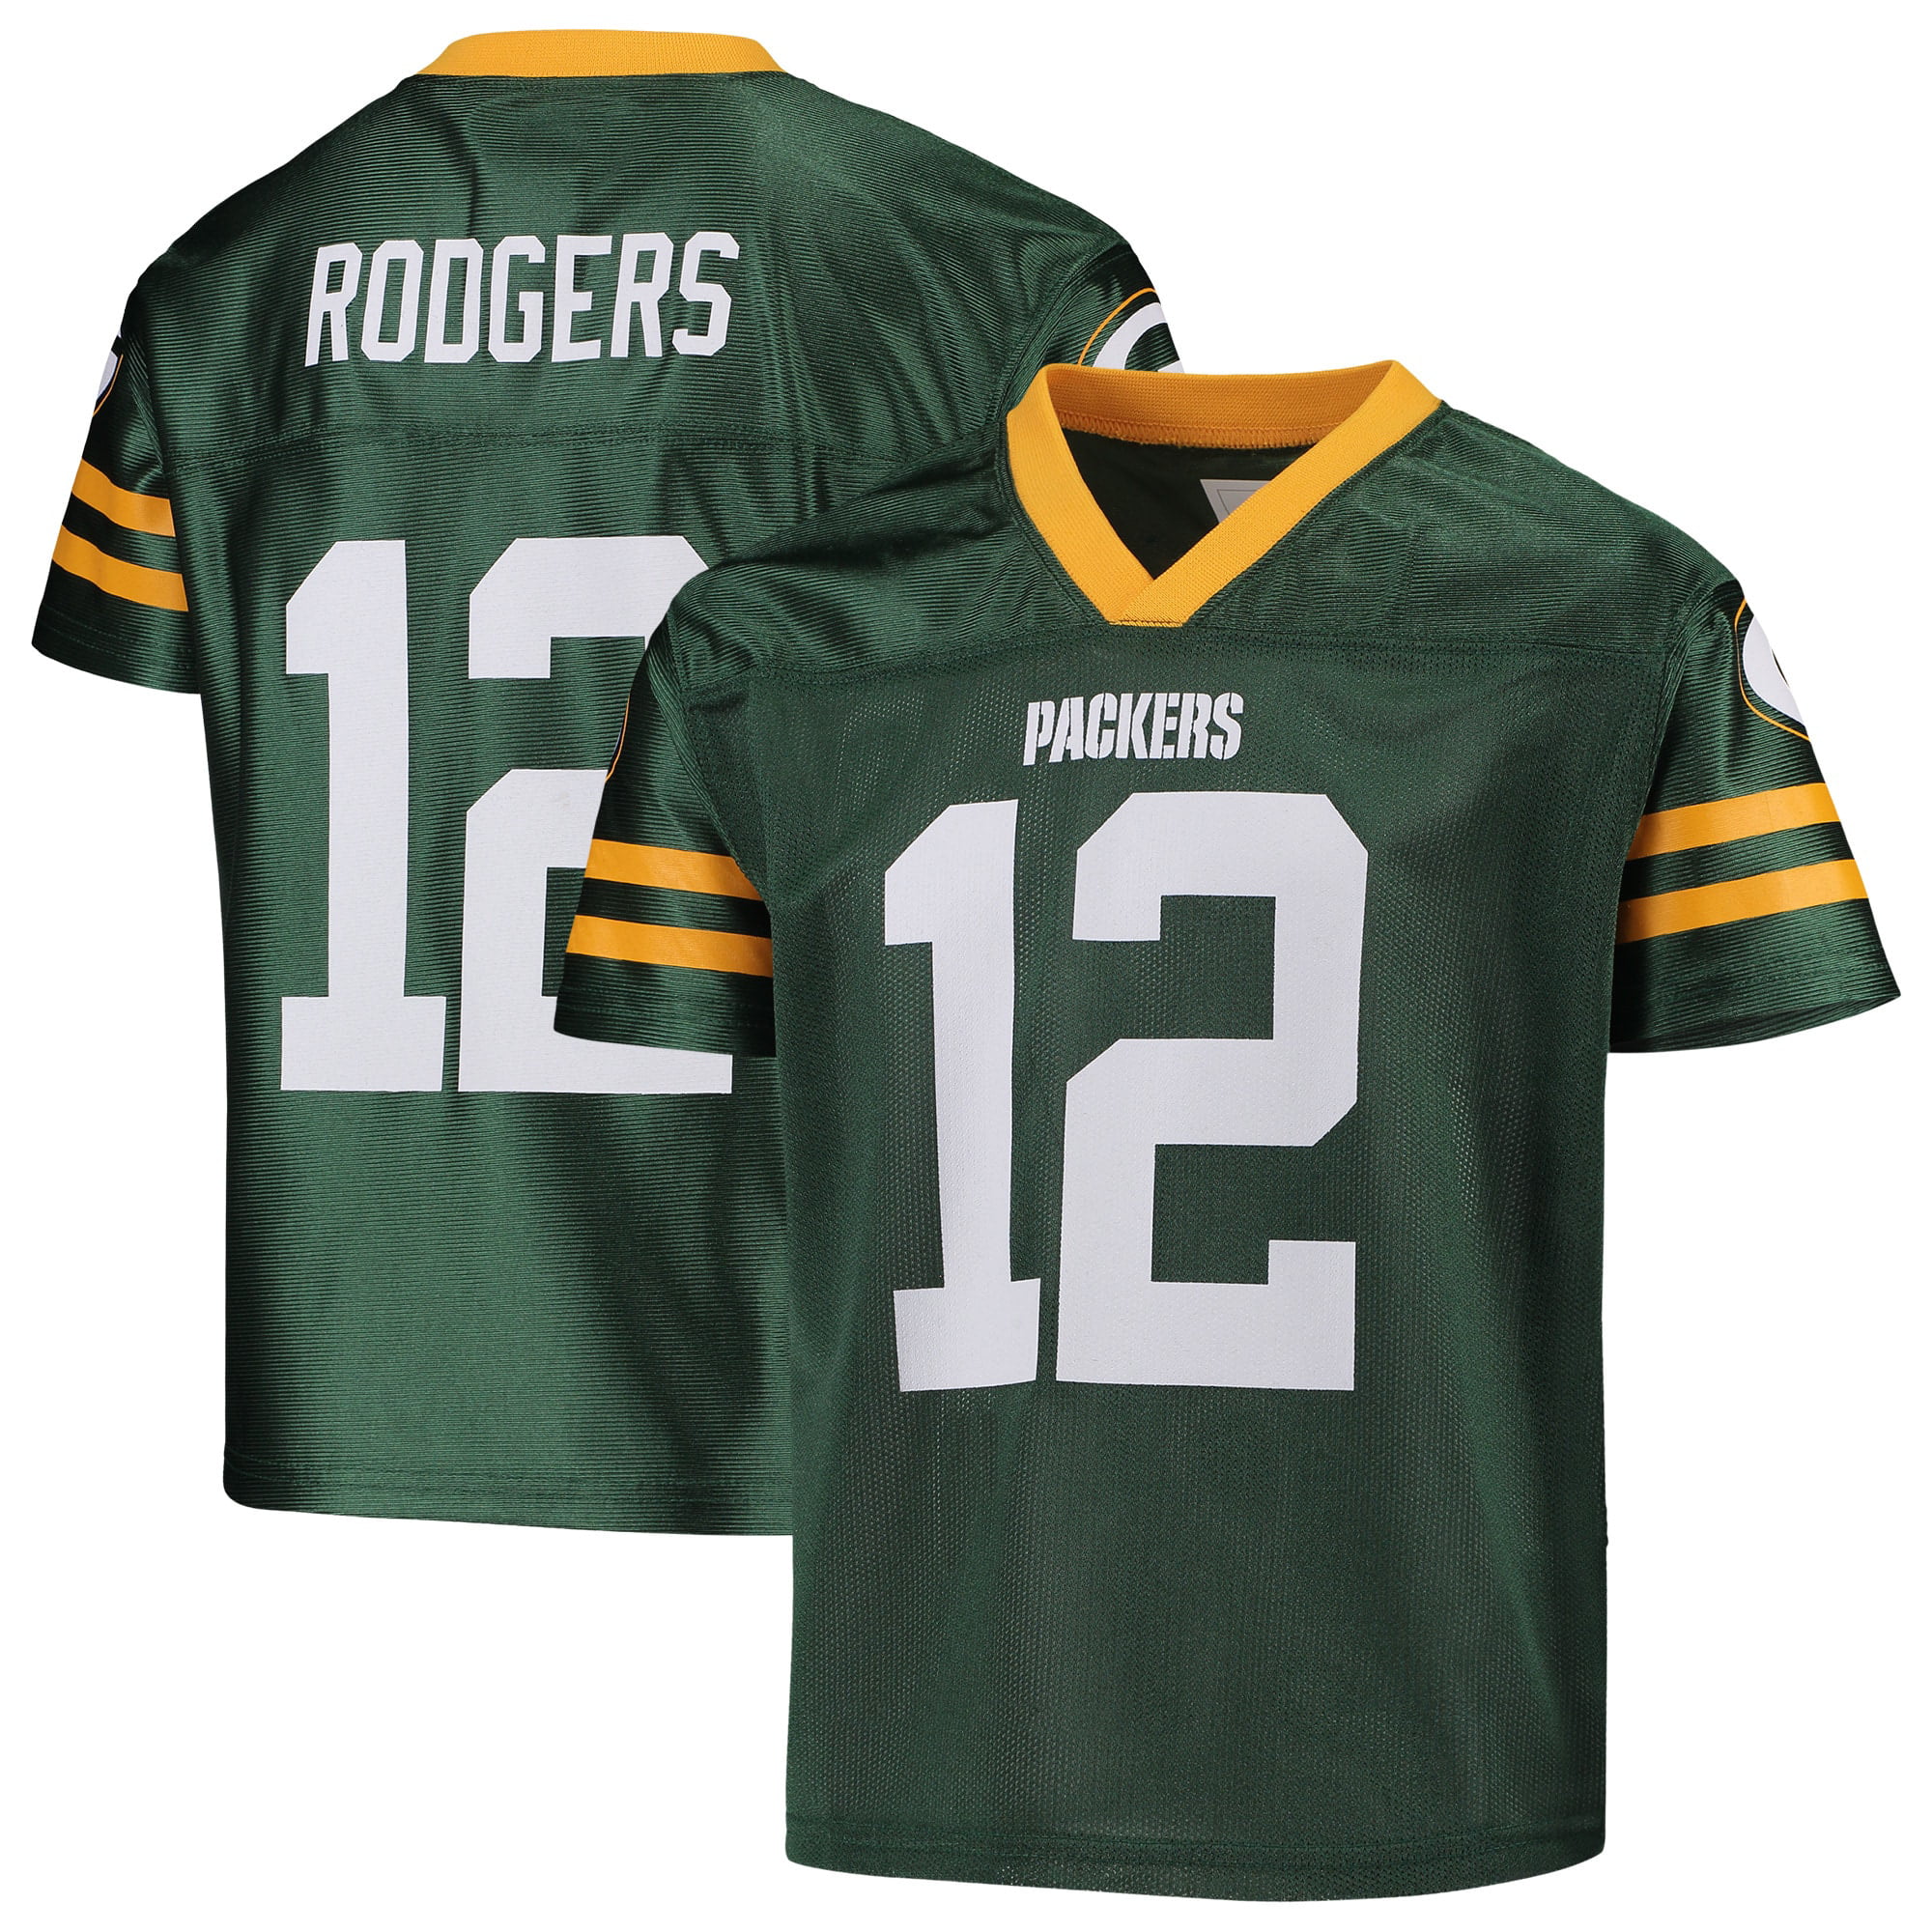 aaron rodgers jersey youth xl